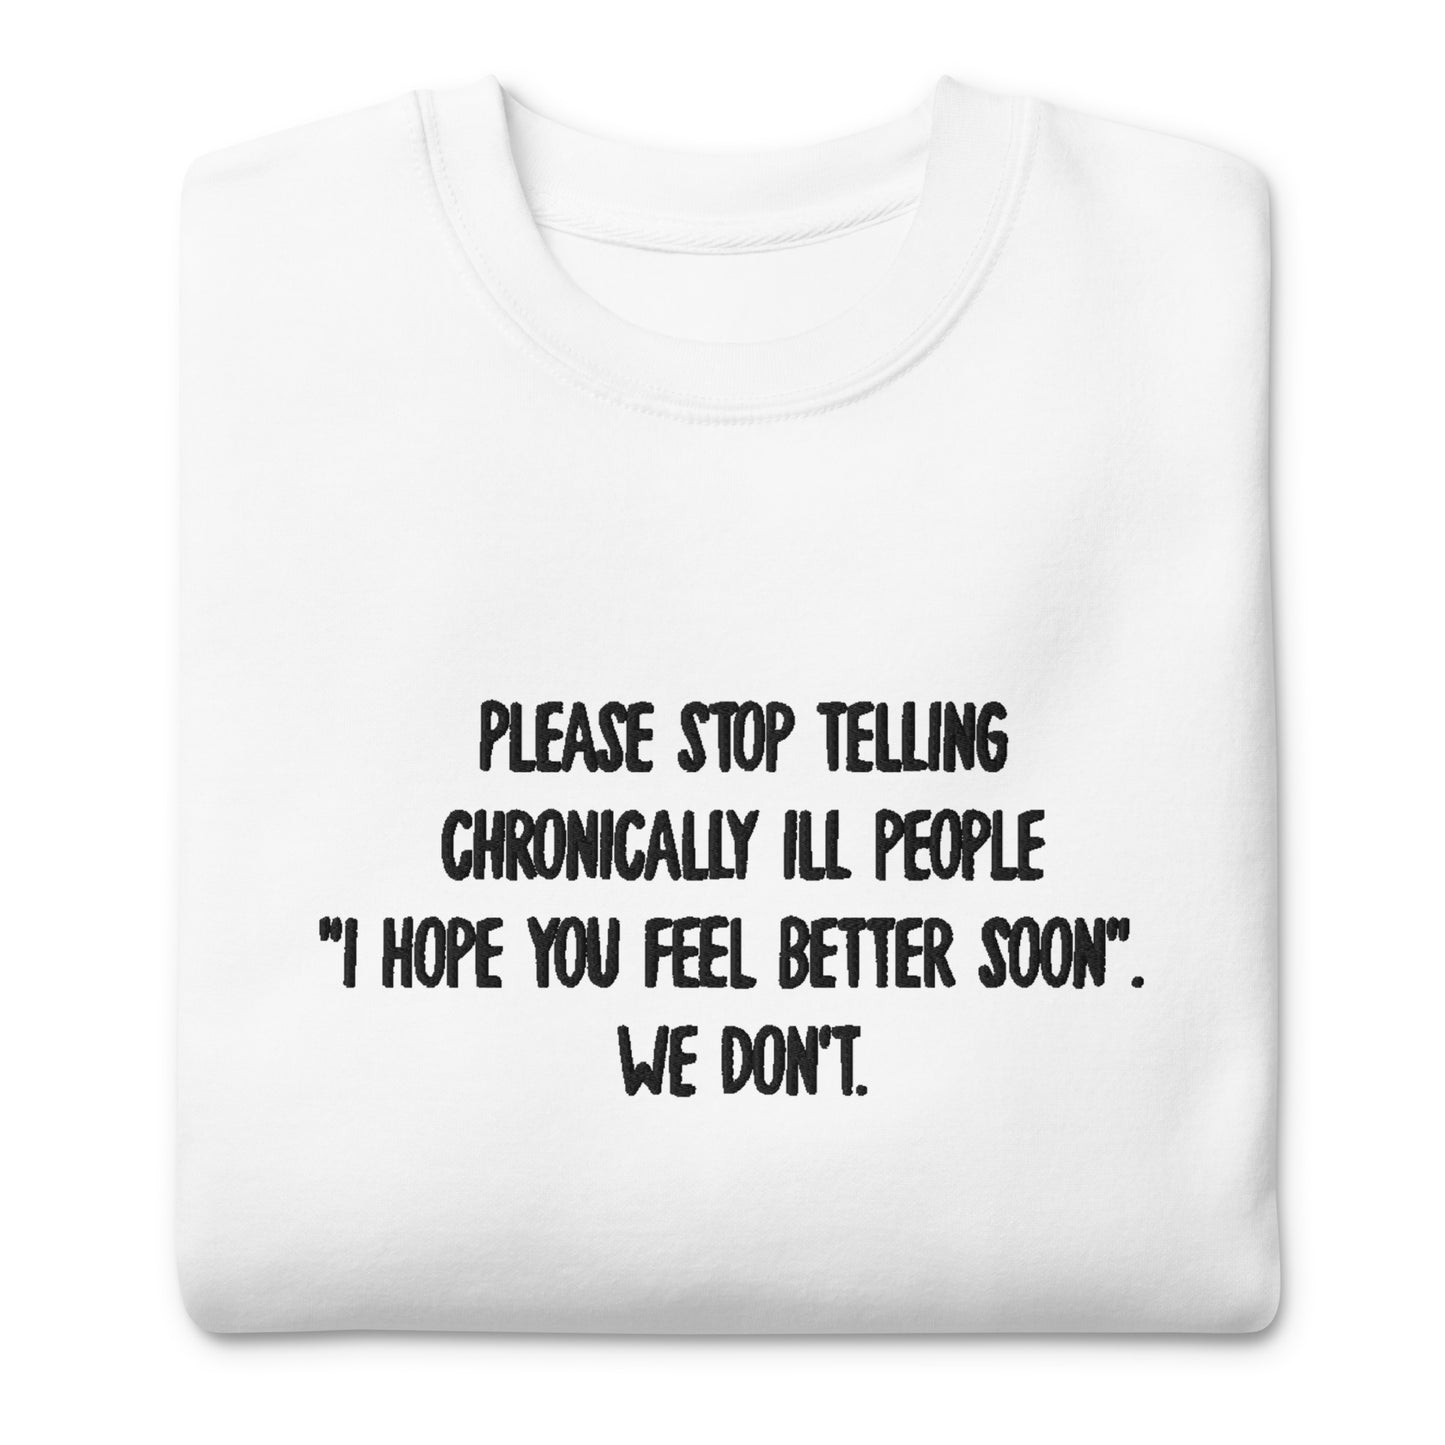 Please Stop Telling Chronically Ill People / Warrior Embroidered Unisex Sweatshirt